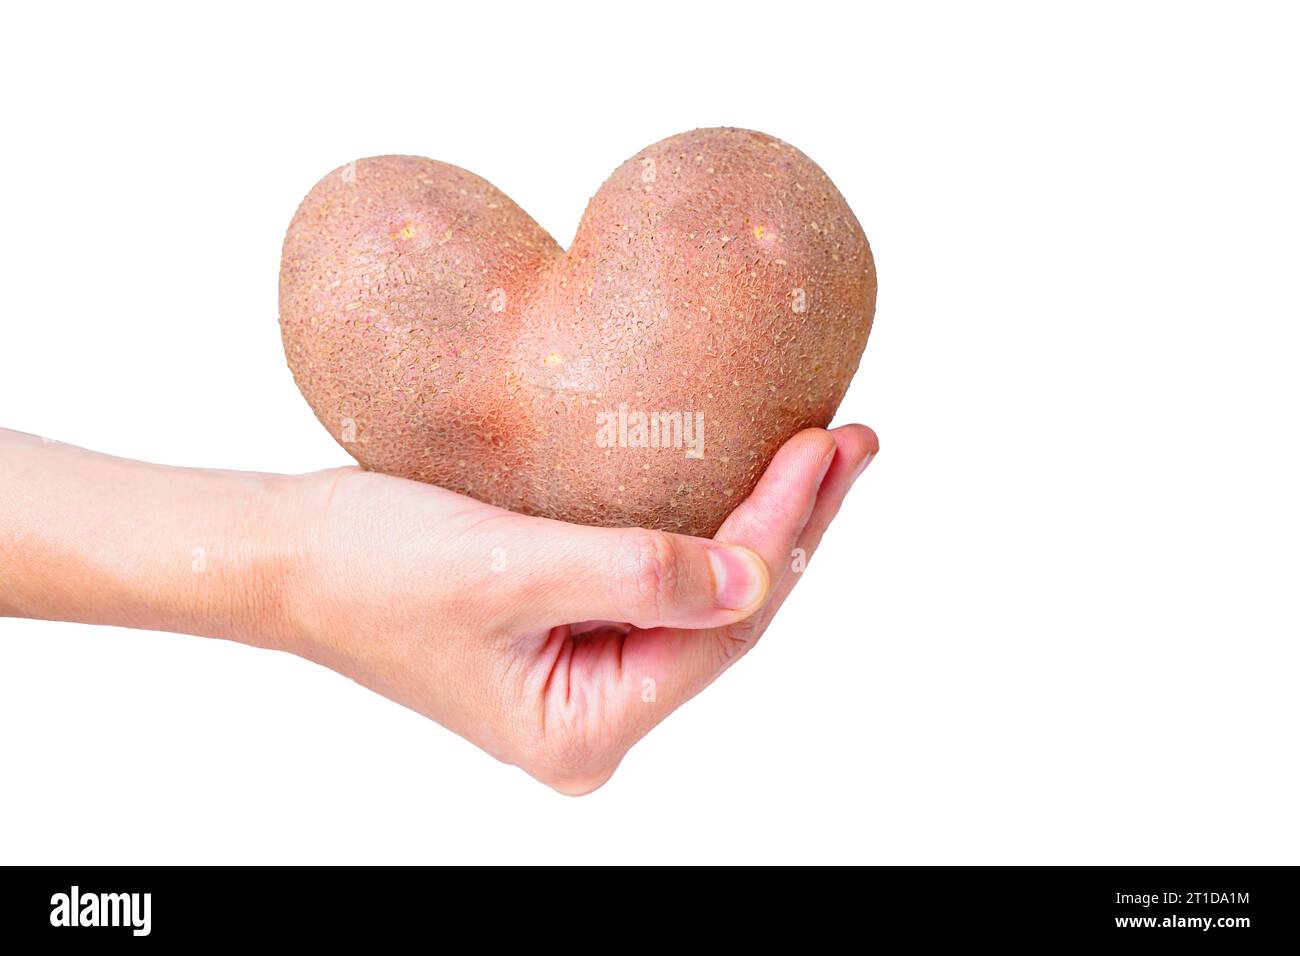 Large heart-shaped potato cradled in a hand against a white background. Symbol of love and wholesome natural produce. Stock Photo